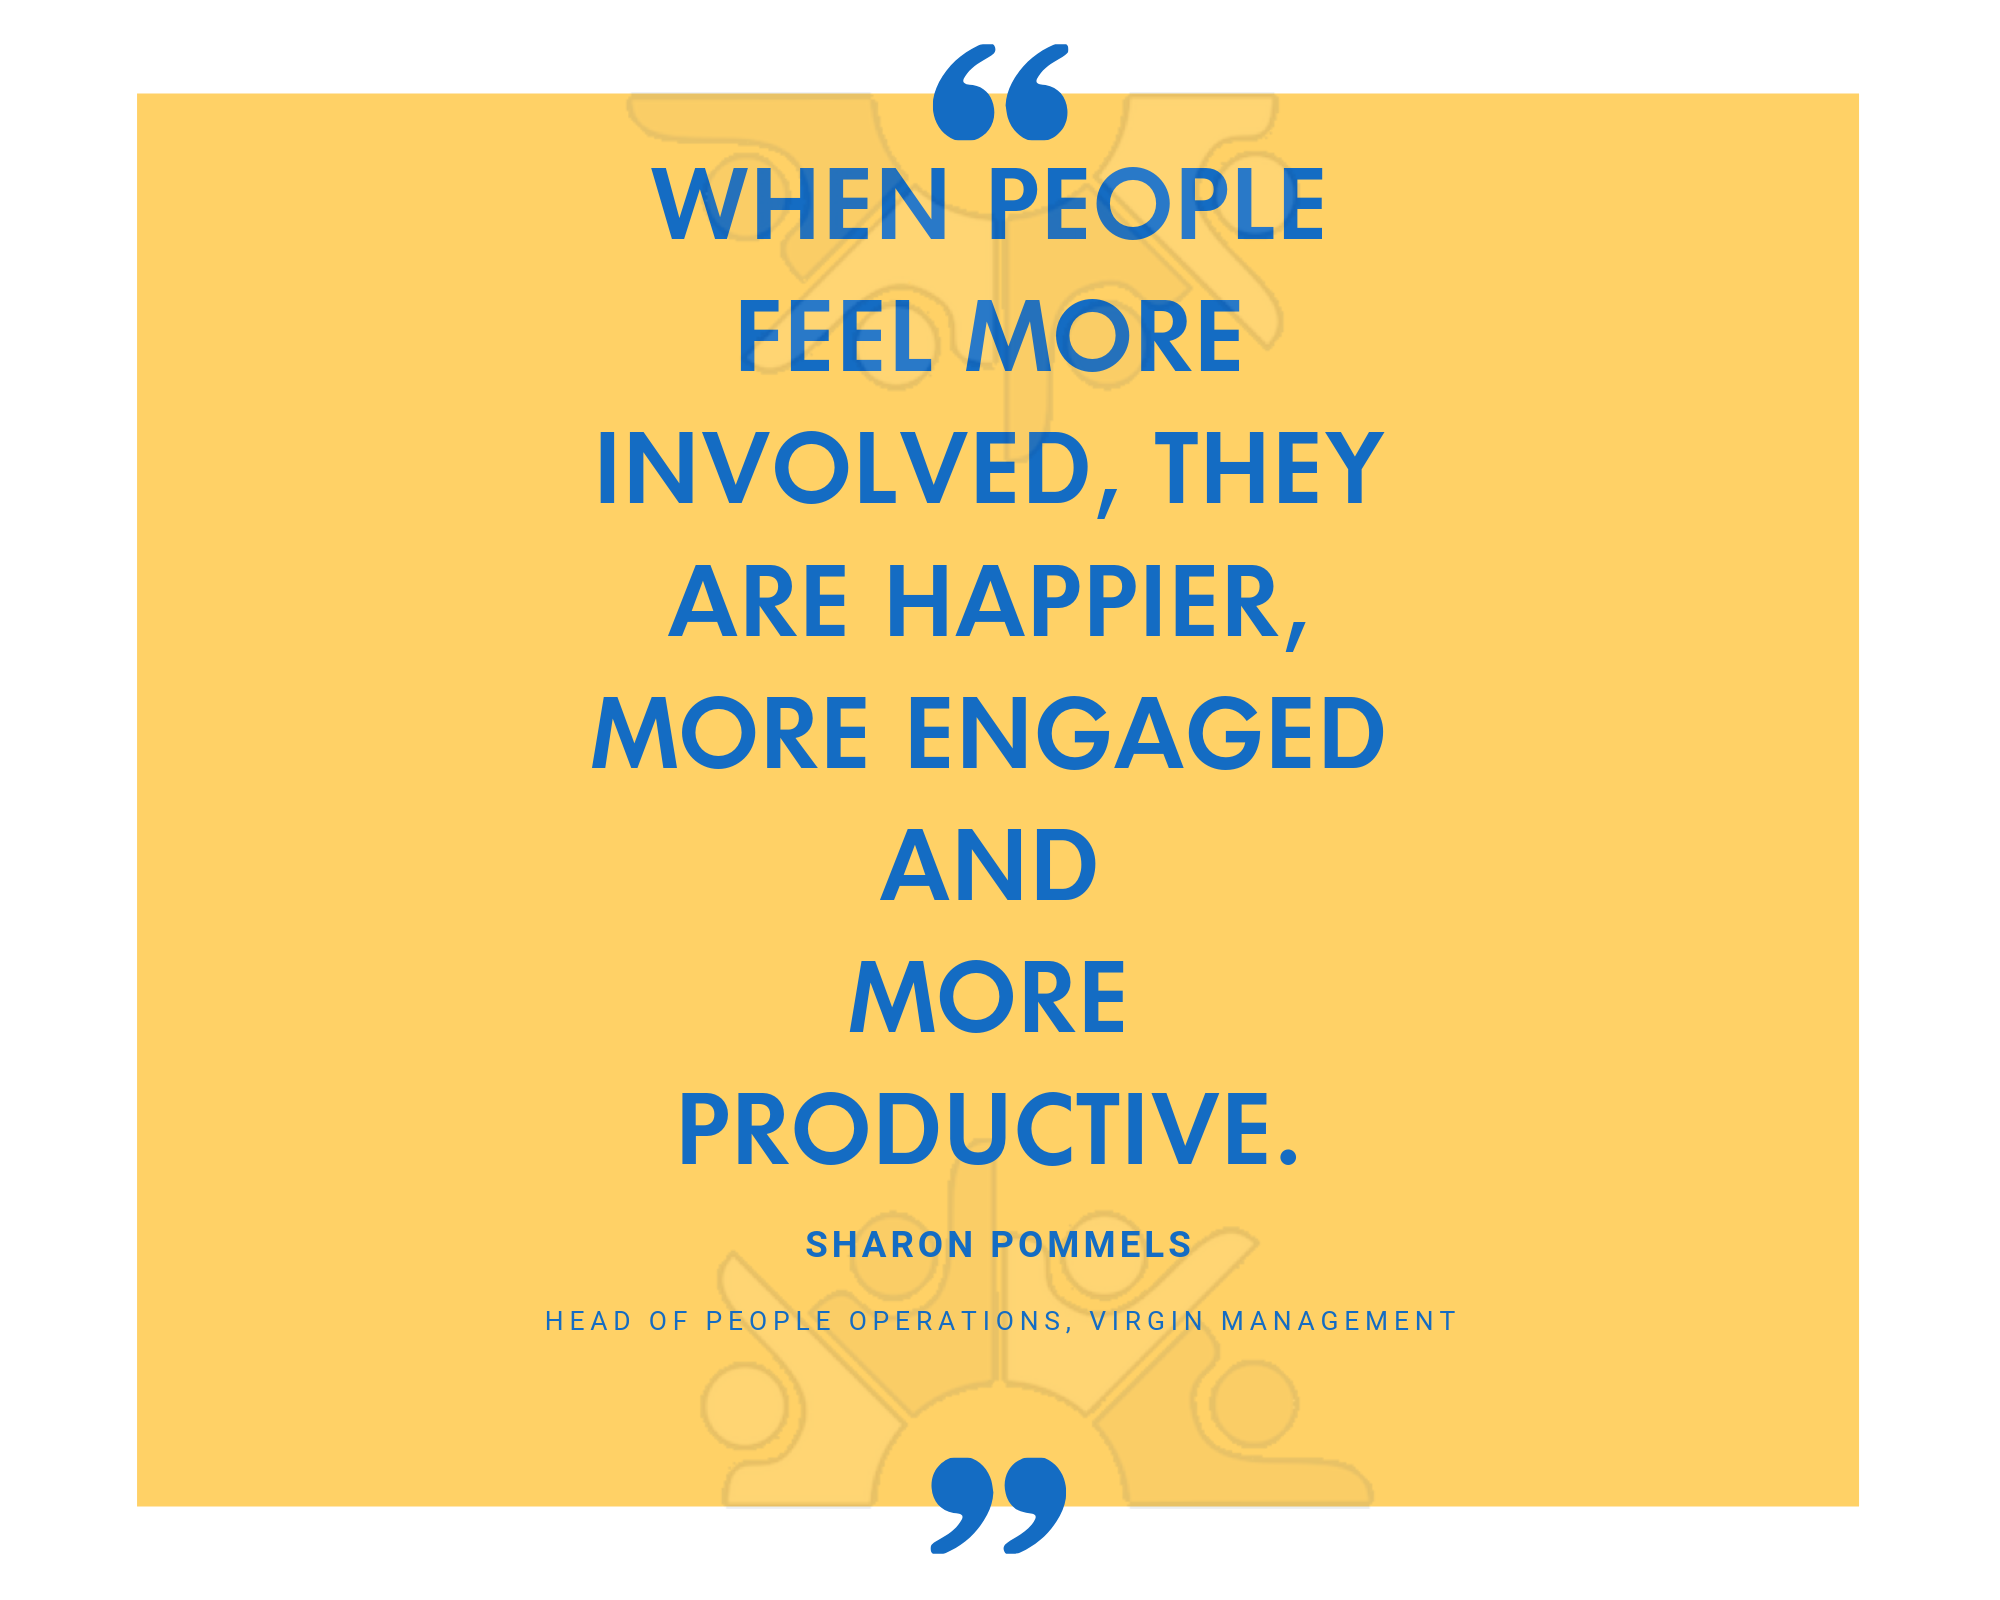 When people feel more involved, they are happier, more engaged and more productive